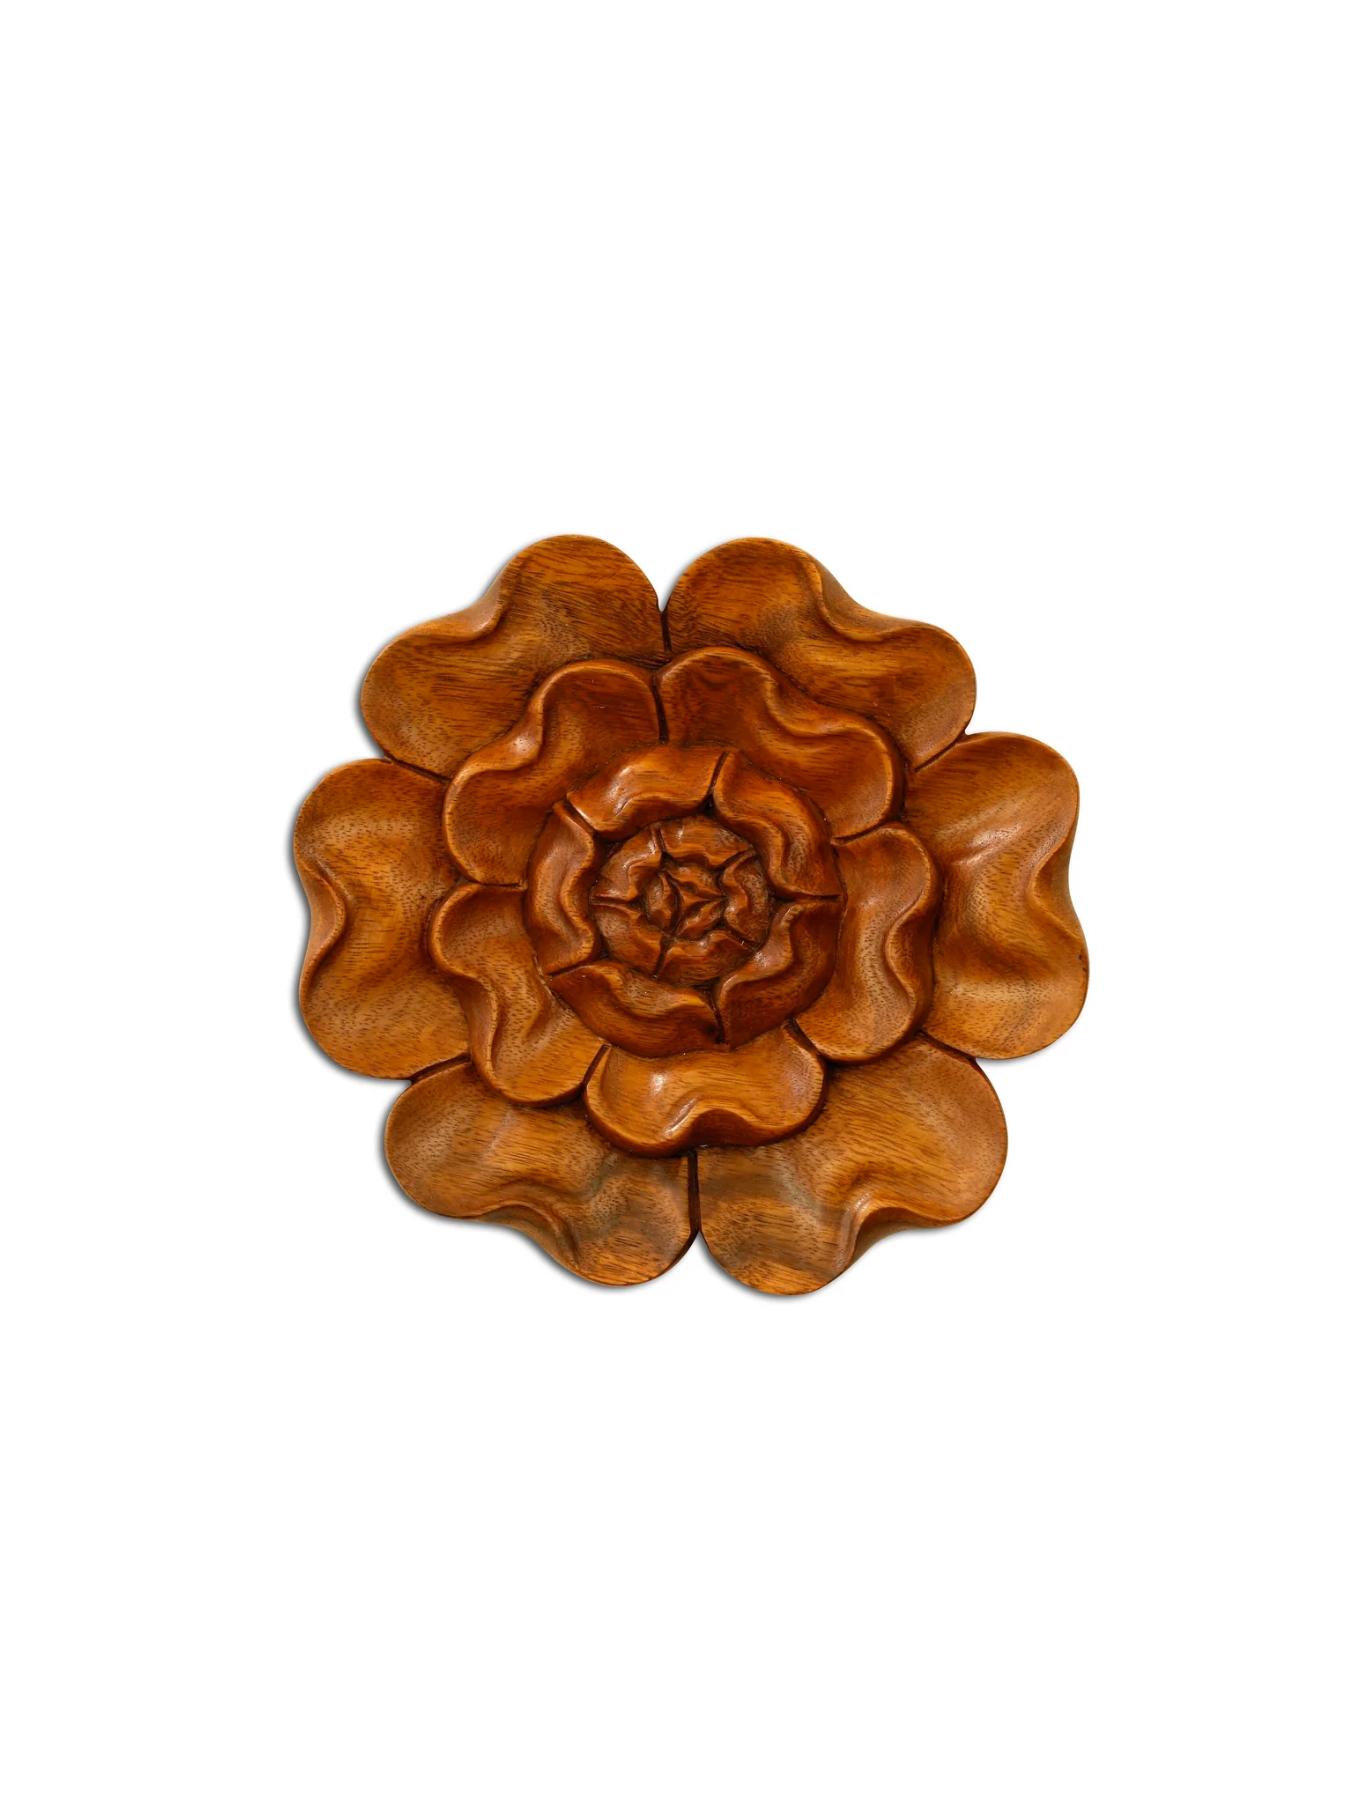 Wooden Hand Carved Wall Art Lotus Flower Relief Panel Handcrafted Wall Plaque Gift Decorative Home Decor Accent Handmade Wood Decoration Floral